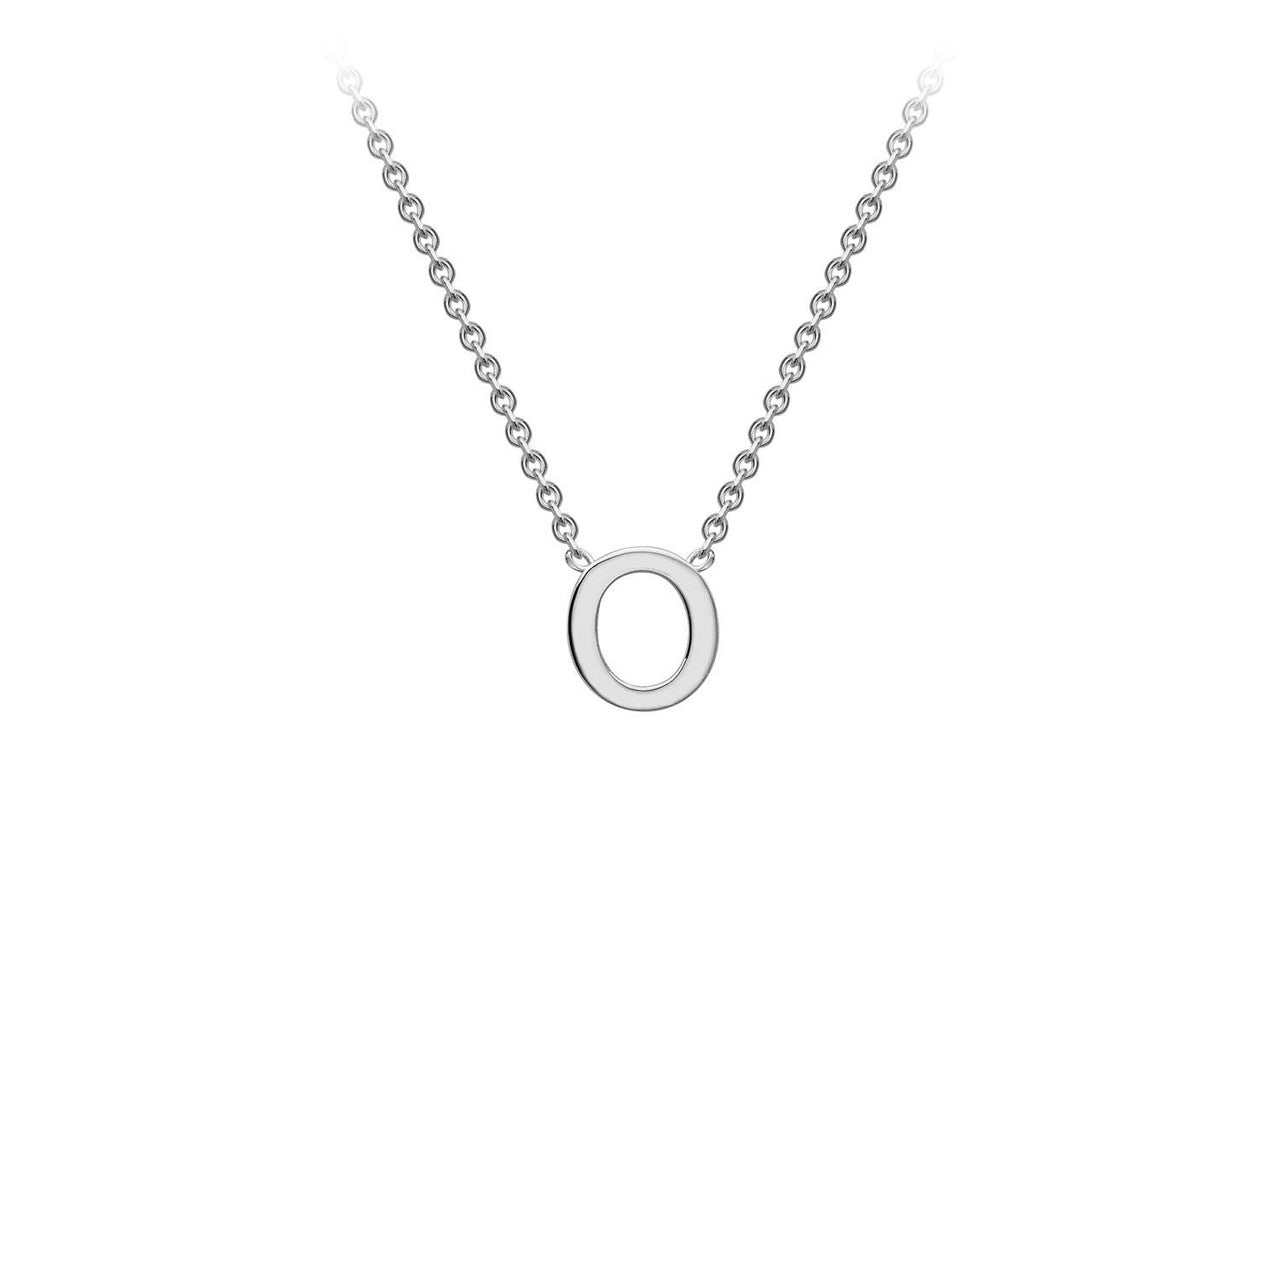 Ice Jewellery 9K White Gold 'O' Initial Adjustable Letter Necklace 38/43cm - 5.19.0164 | Ice Jewellery Australia